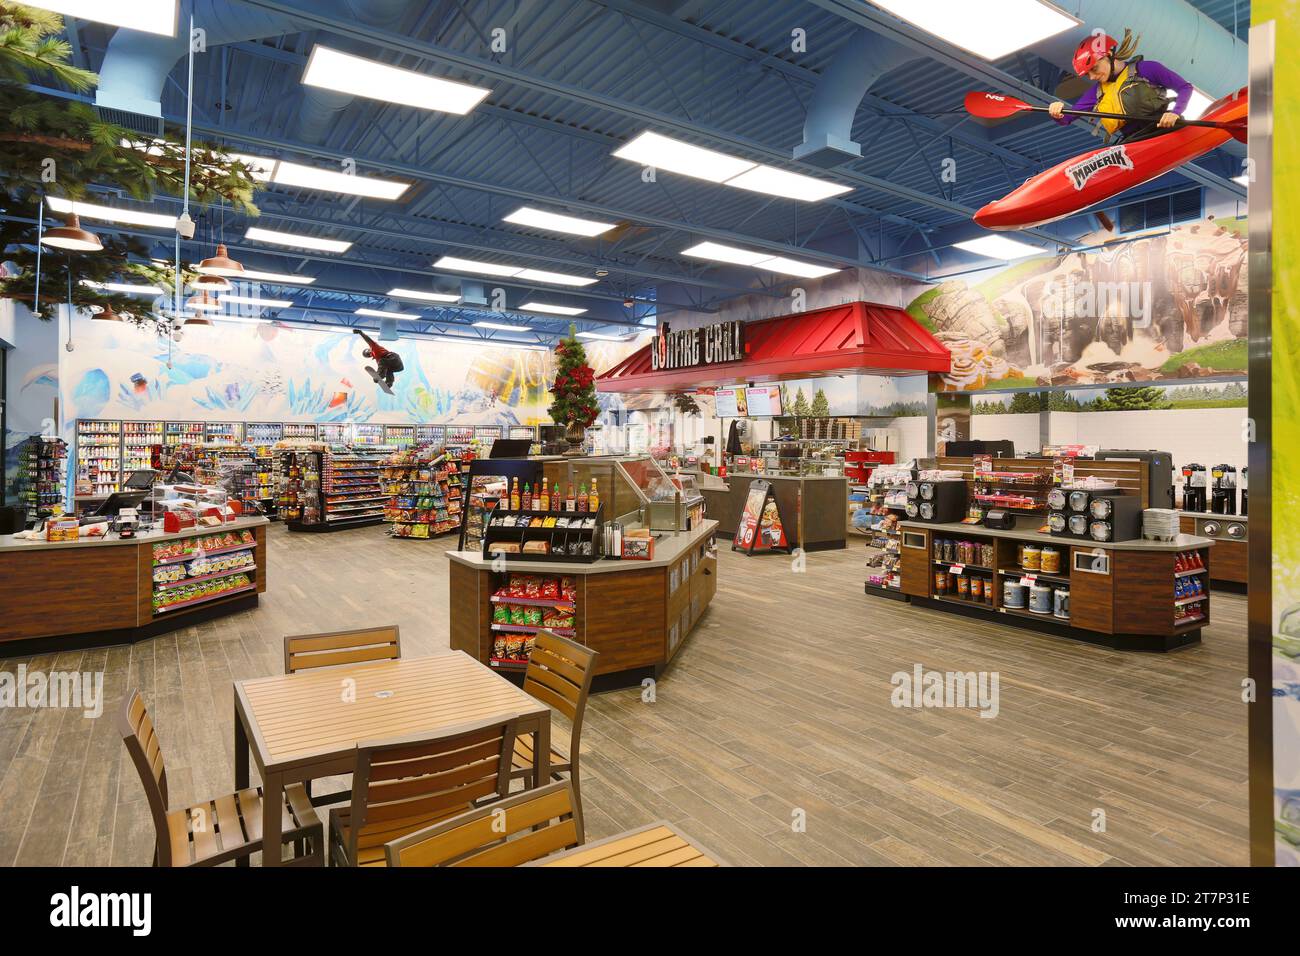 The interior of a new, modern Maverik branded convienience store with rows of merchandise, and a Bonfire Grill. Stock Photo